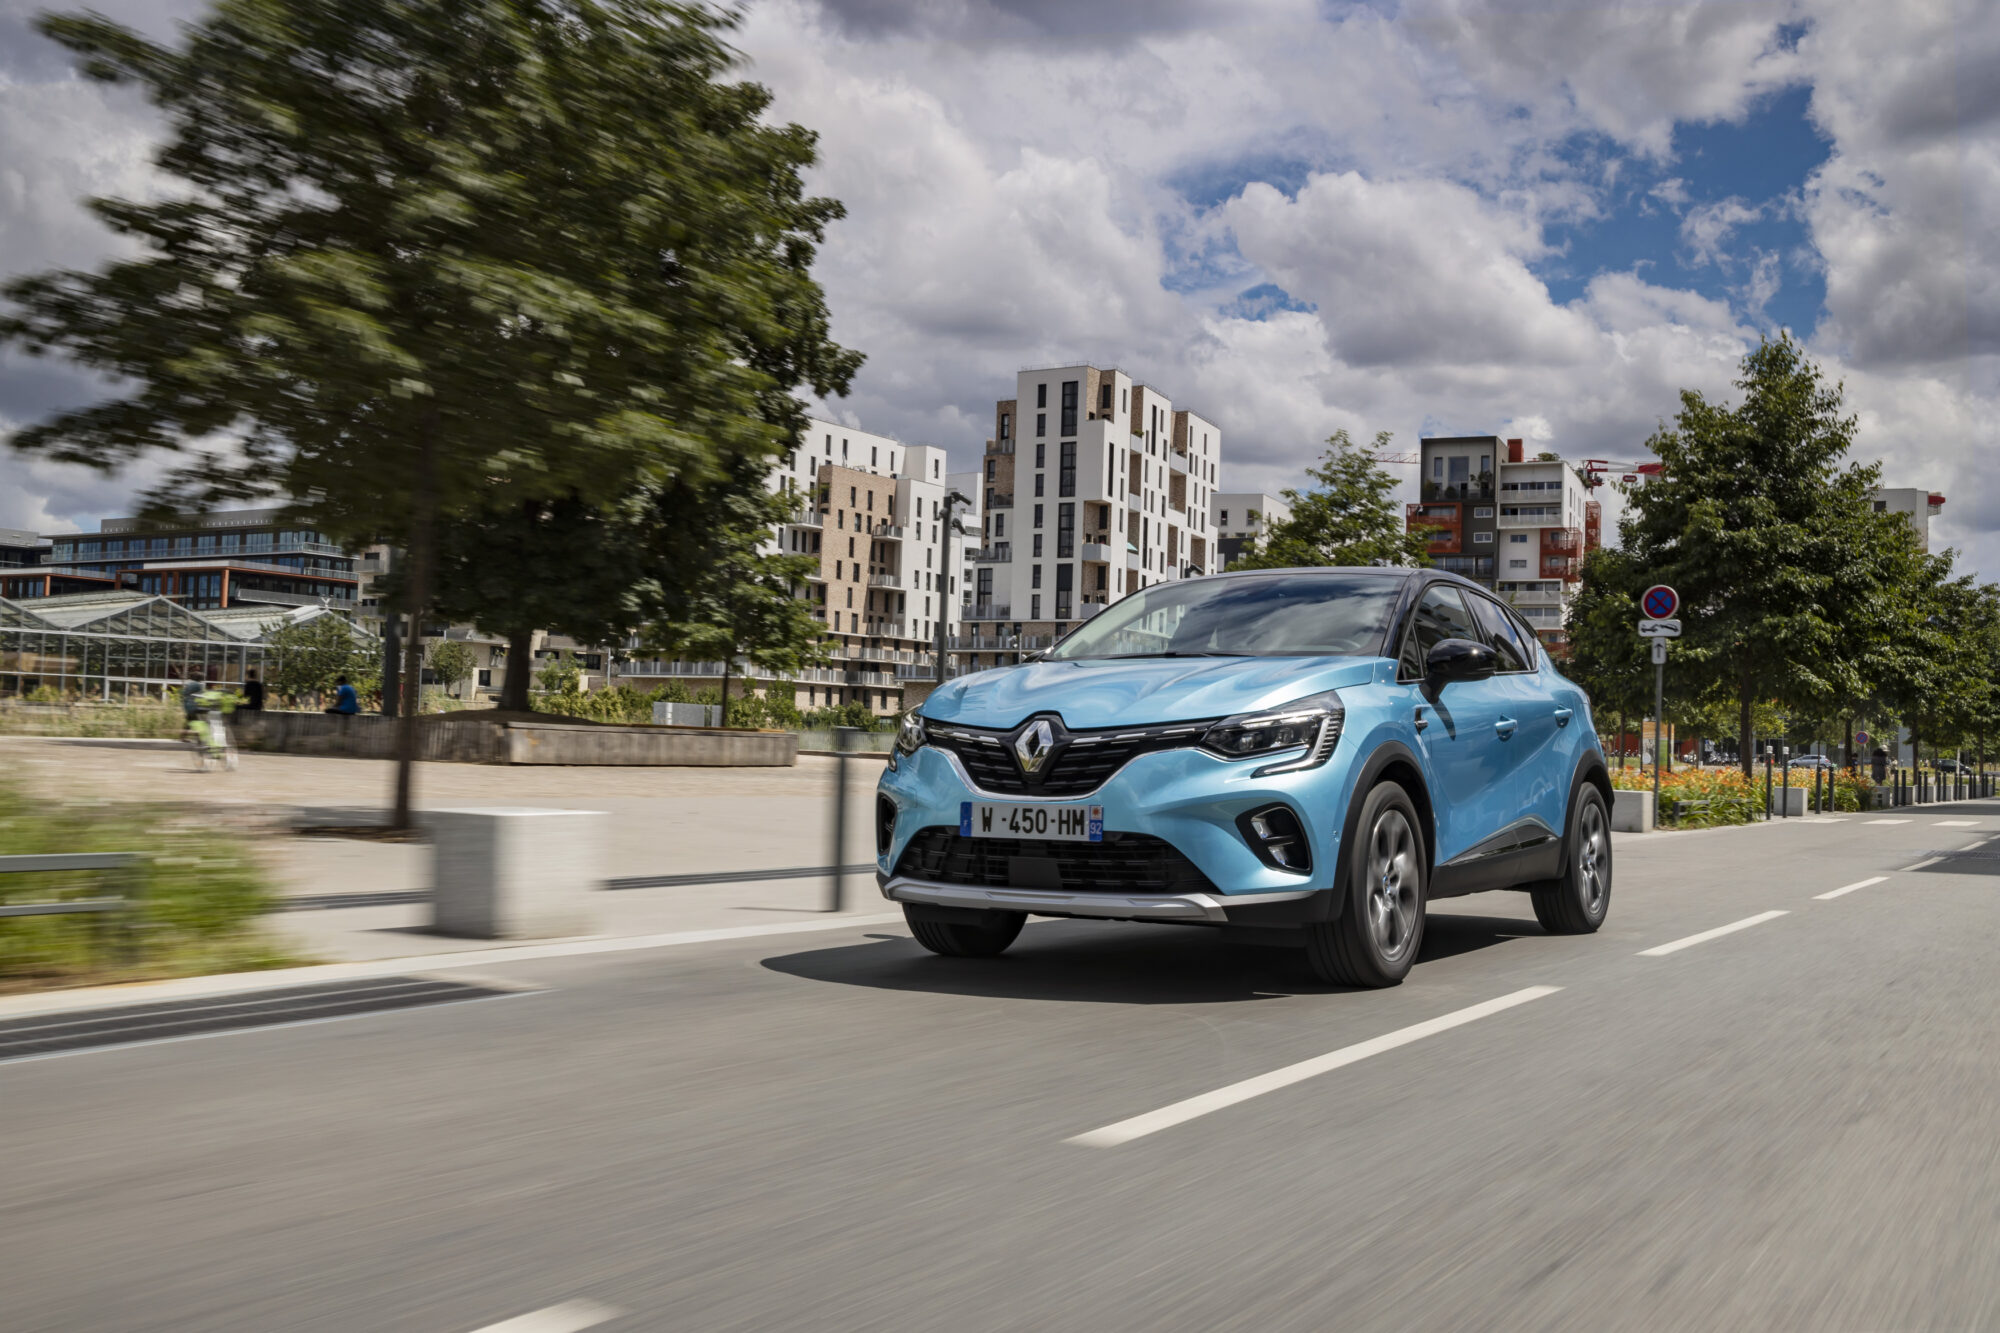 2020 - New Renault CAPTUR E-TECH Plug-in tests drive